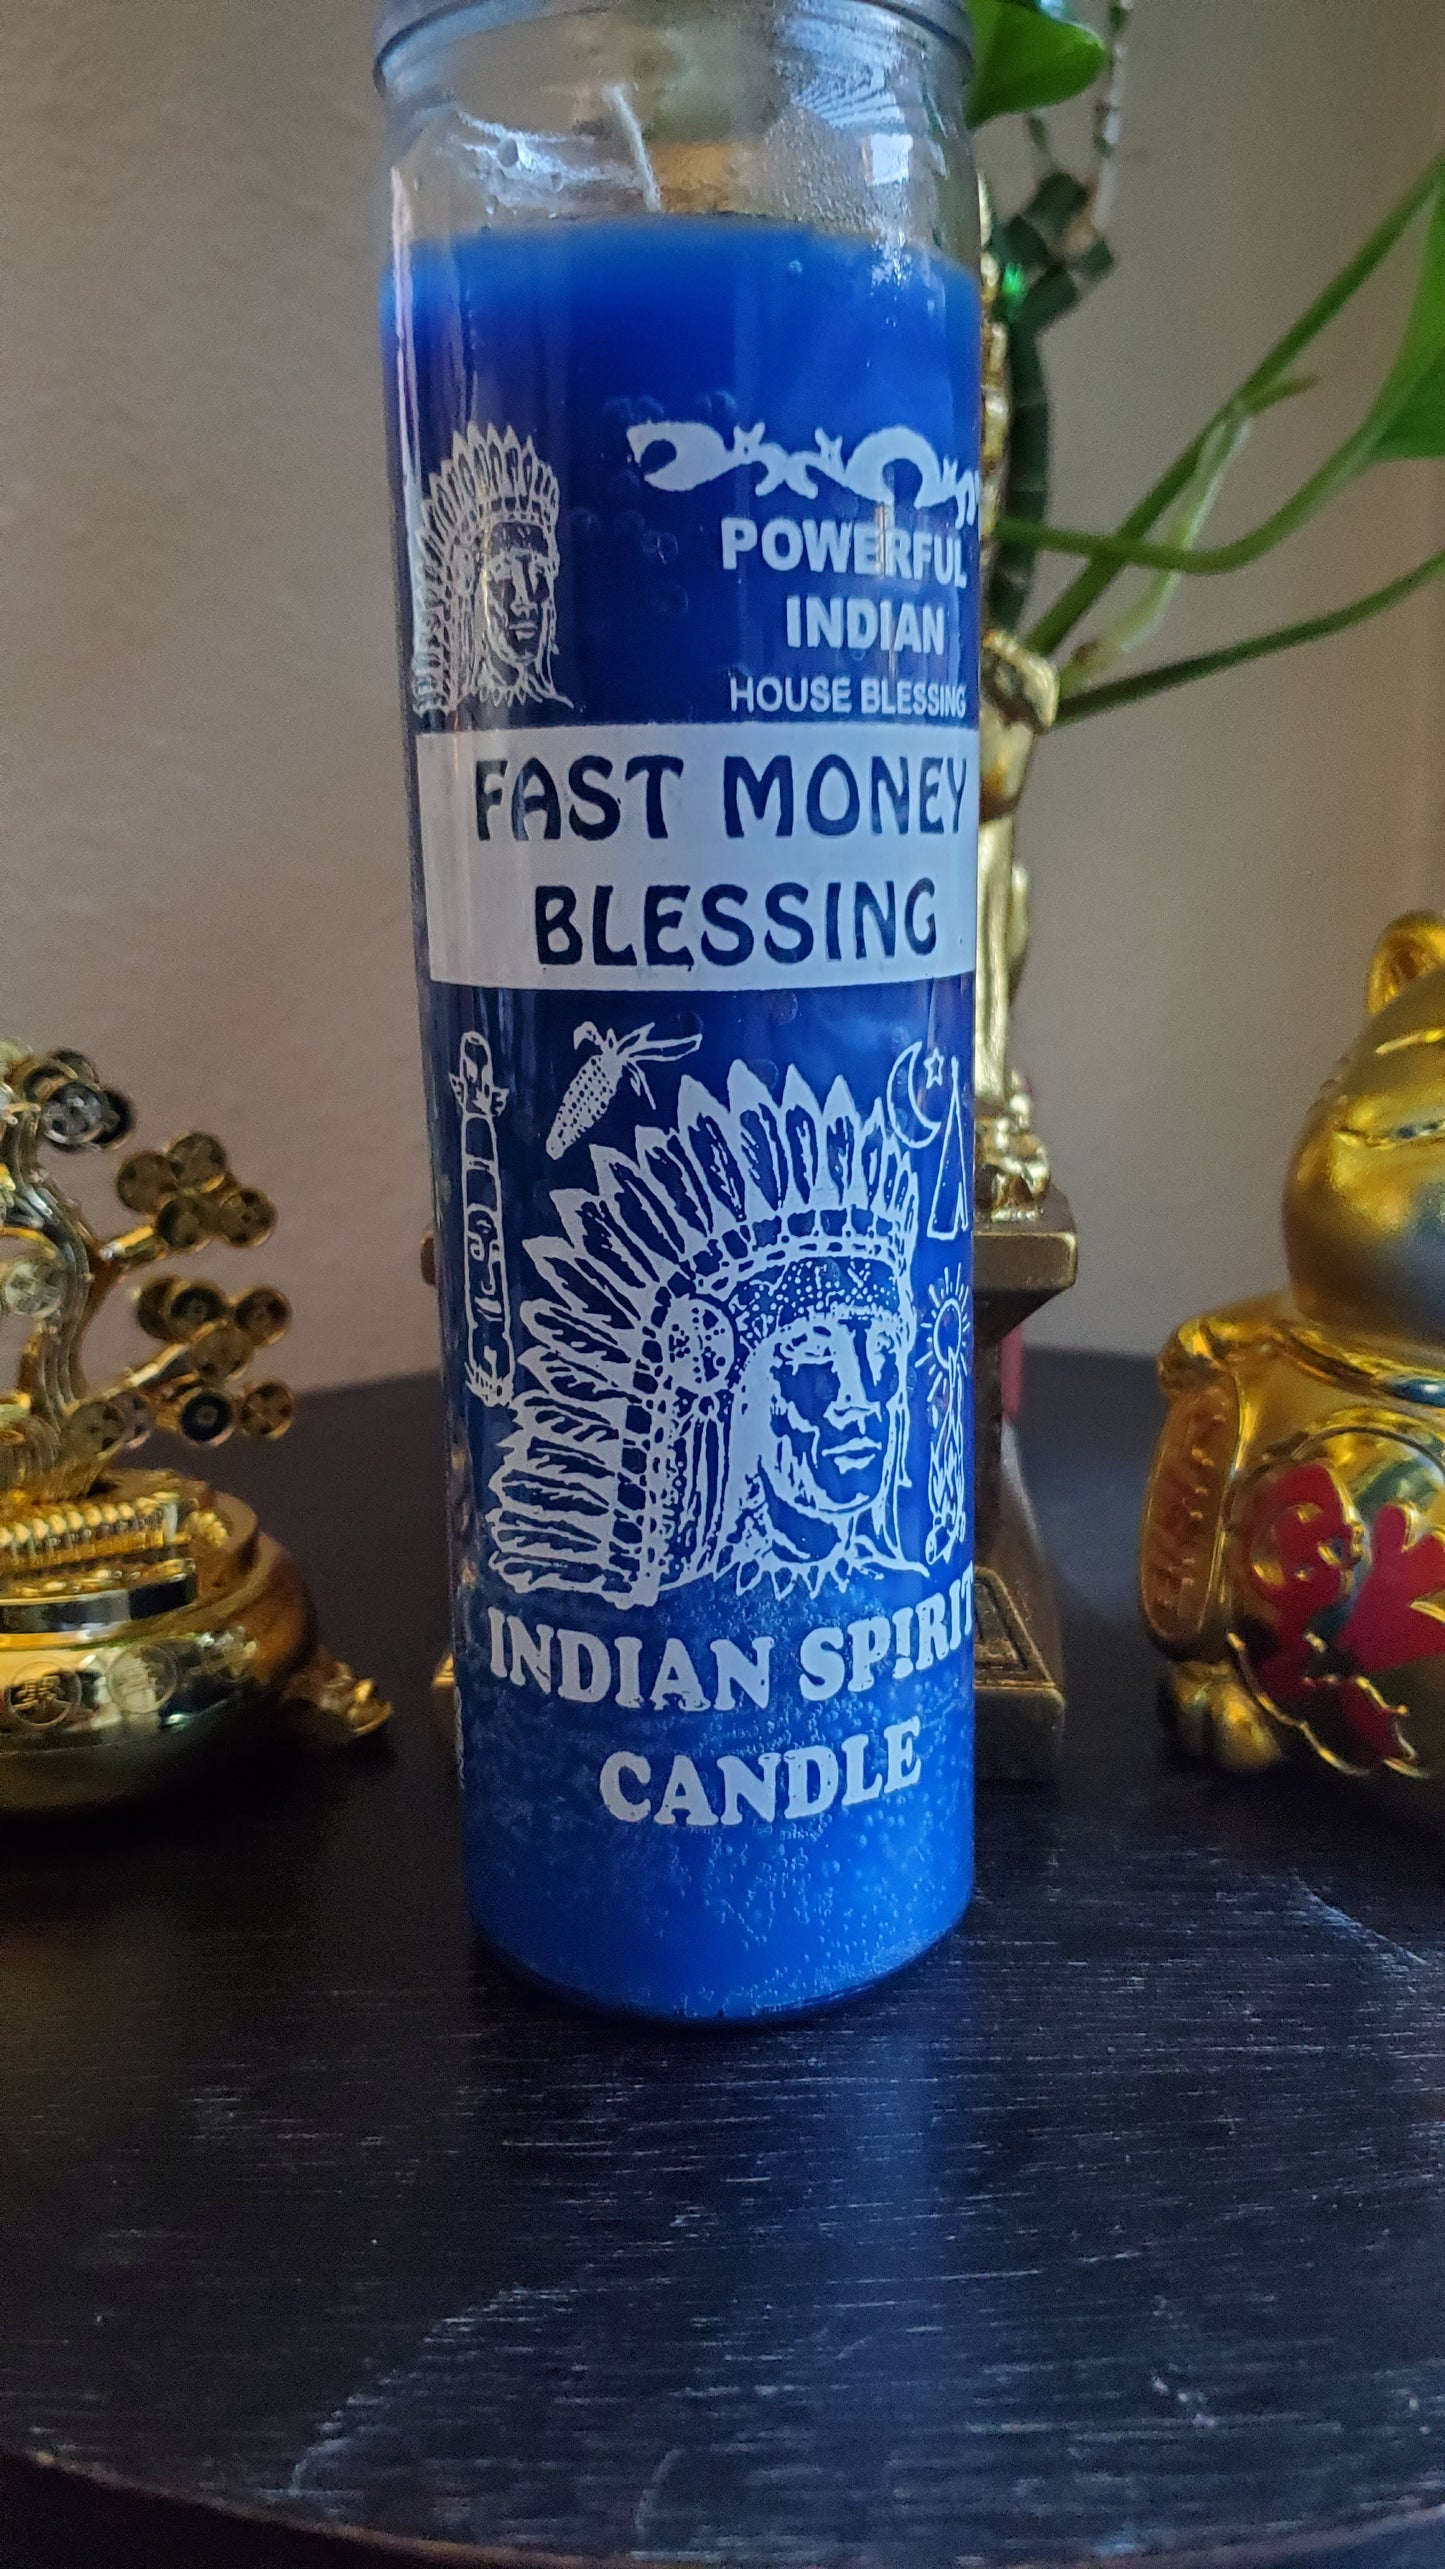 Indian Spirit Candle / Fast Money Blessing #Curio #ChakraHealing #Curio #CandleMagick #Cleansing #MoneyMagick #SpiritMagick